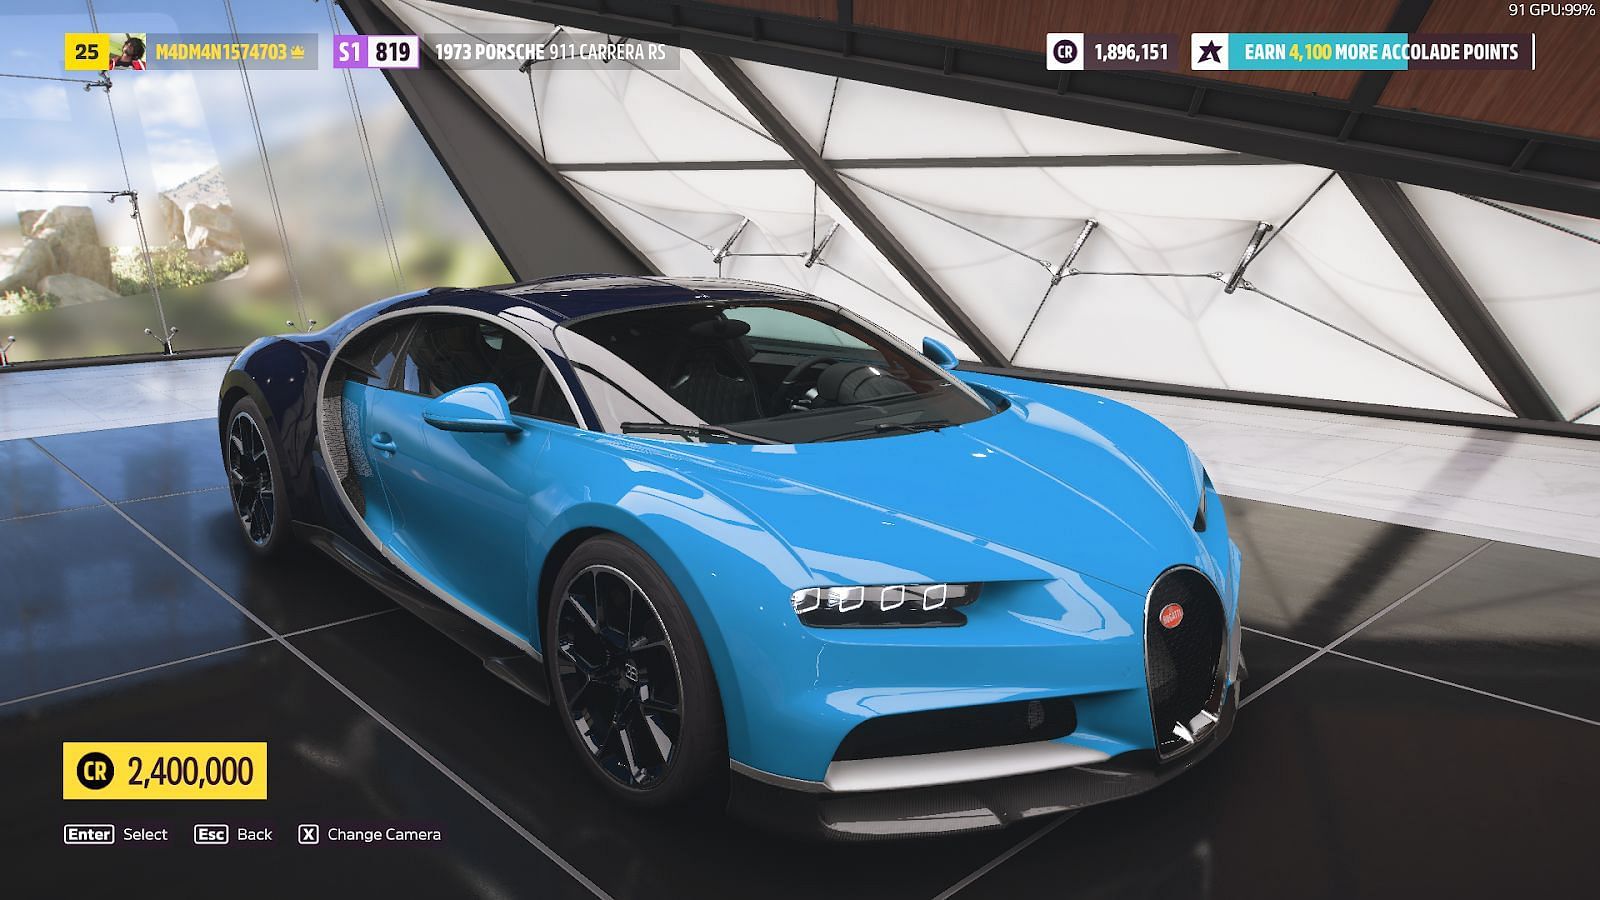 10 fastest cars in Forza Horizon 5 (with top speed)